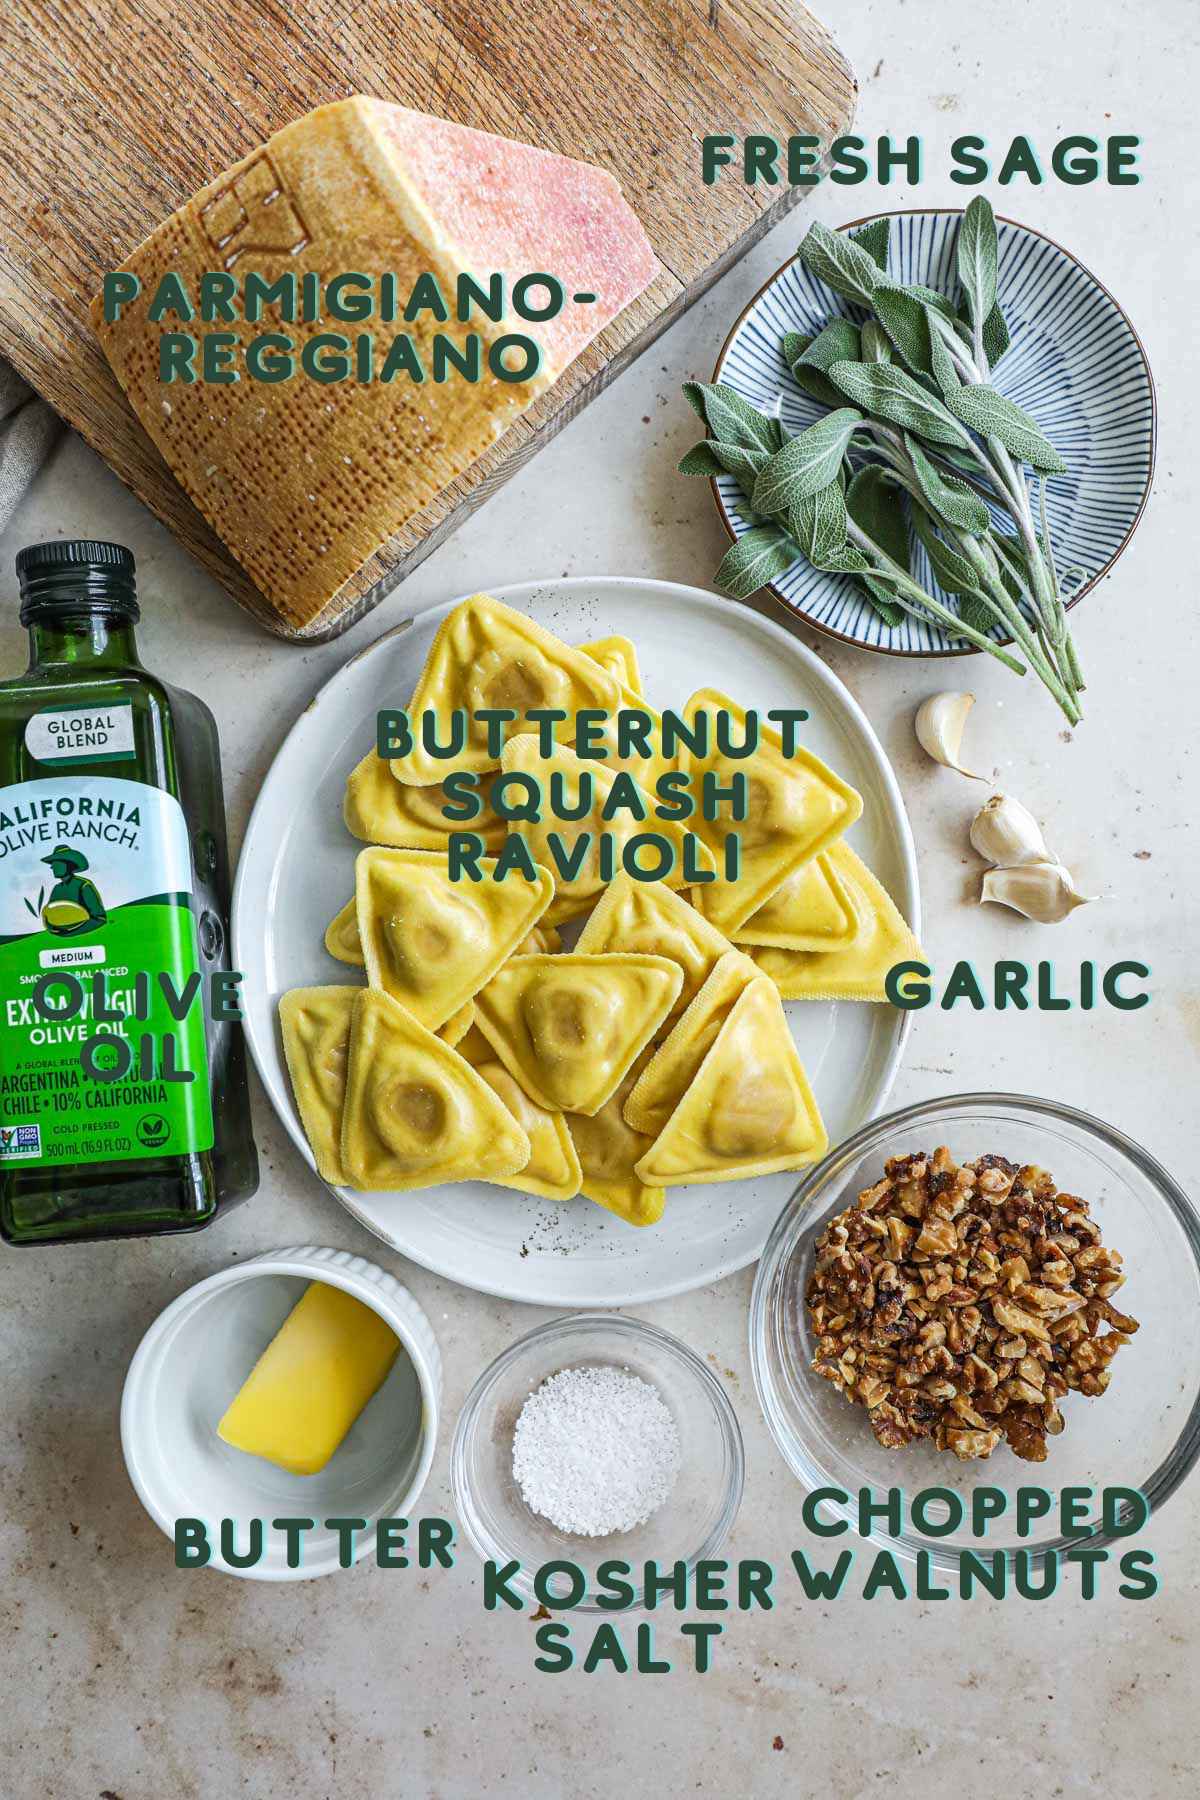 Ingredients to make butternut squash ravioli in a browned butter sauce, including butternut squash ravioli, olive oil, fresh sage leaves, butter, kosher salt, chopped walnuts, garlic, and parmigiano reggiano.